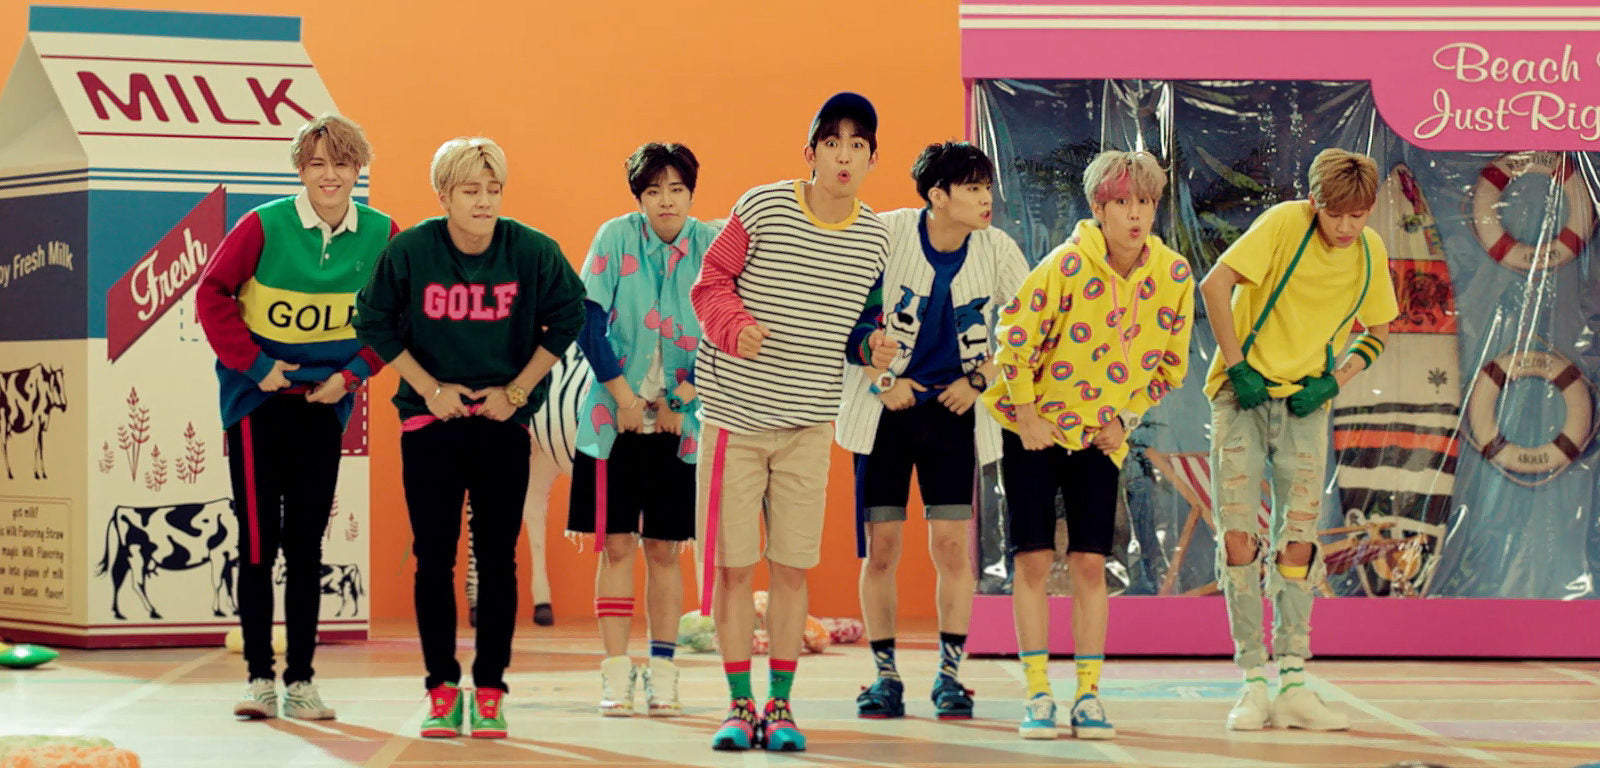 GOT7: "Just Right" becomes the group's first MV to exceed 300 million views - Kpopshop